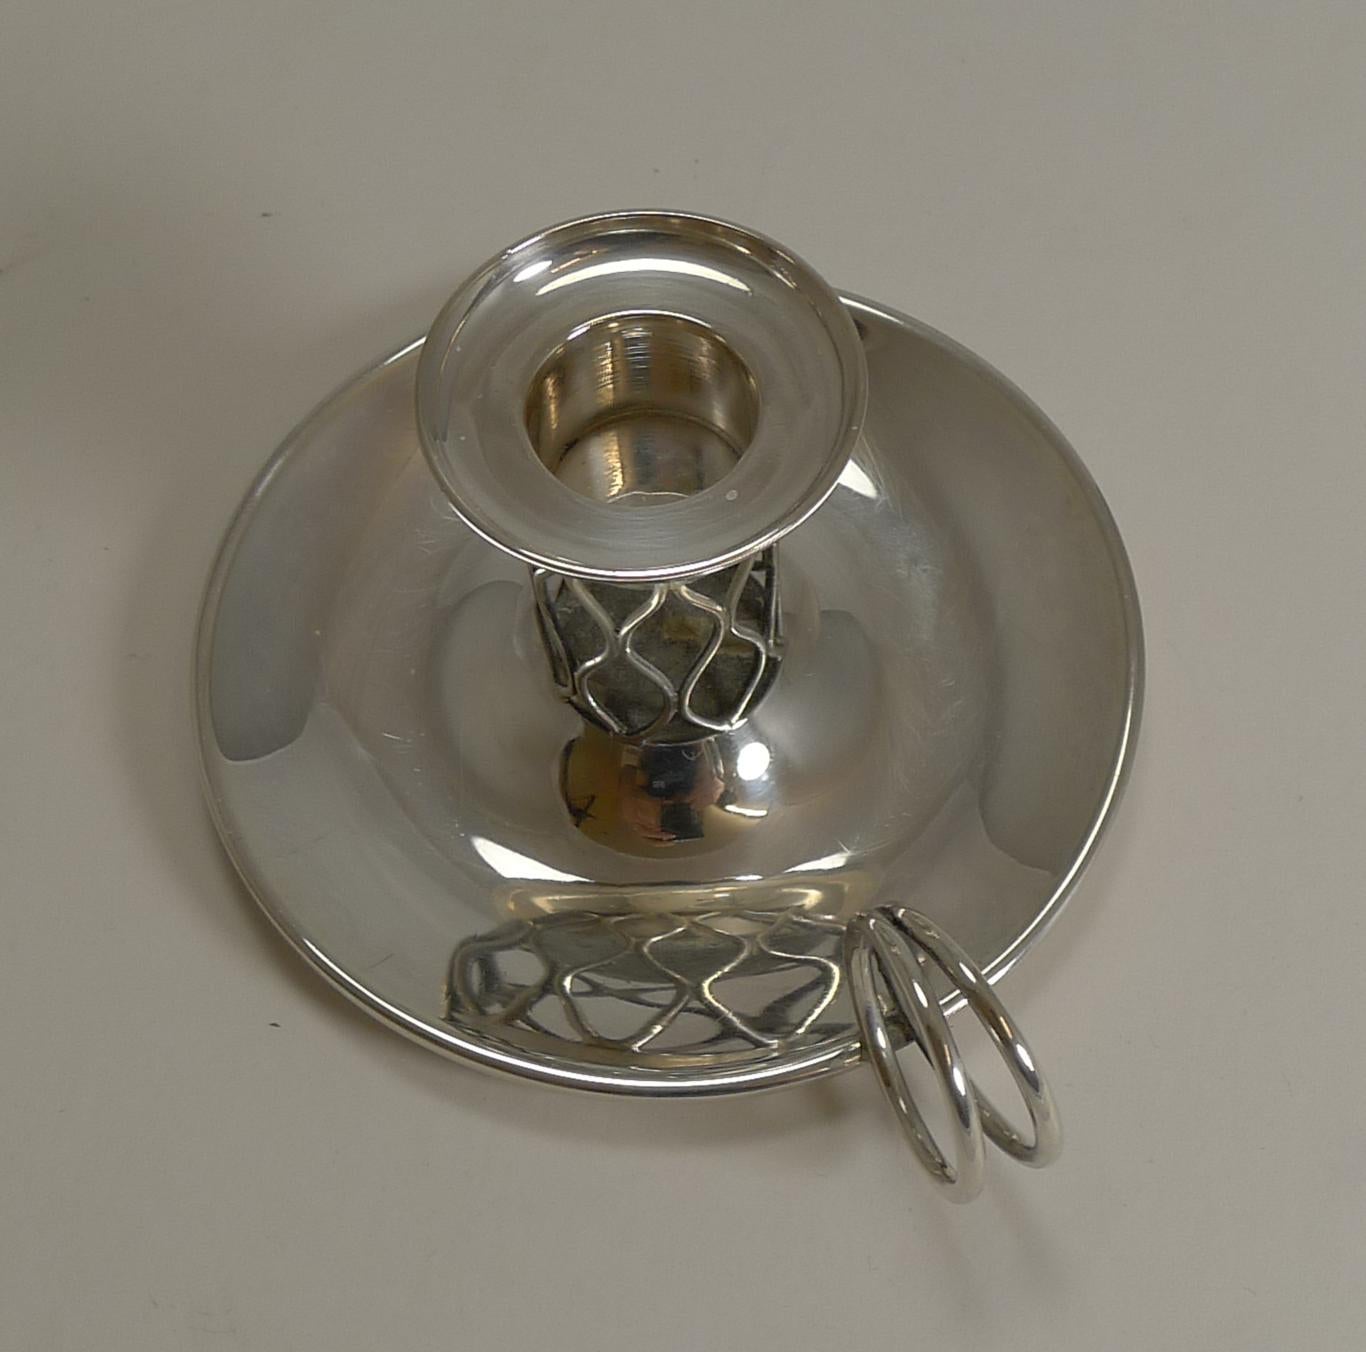 A highly sought-after and collectible piece of vintage Danish sterling silver by the wonderful designer, Svend Weihrauch (1899-1962) and created at F. Hingelberg in Aarhus, Denmark; this piece was designed in 1946.

From 1928 to 1956, the